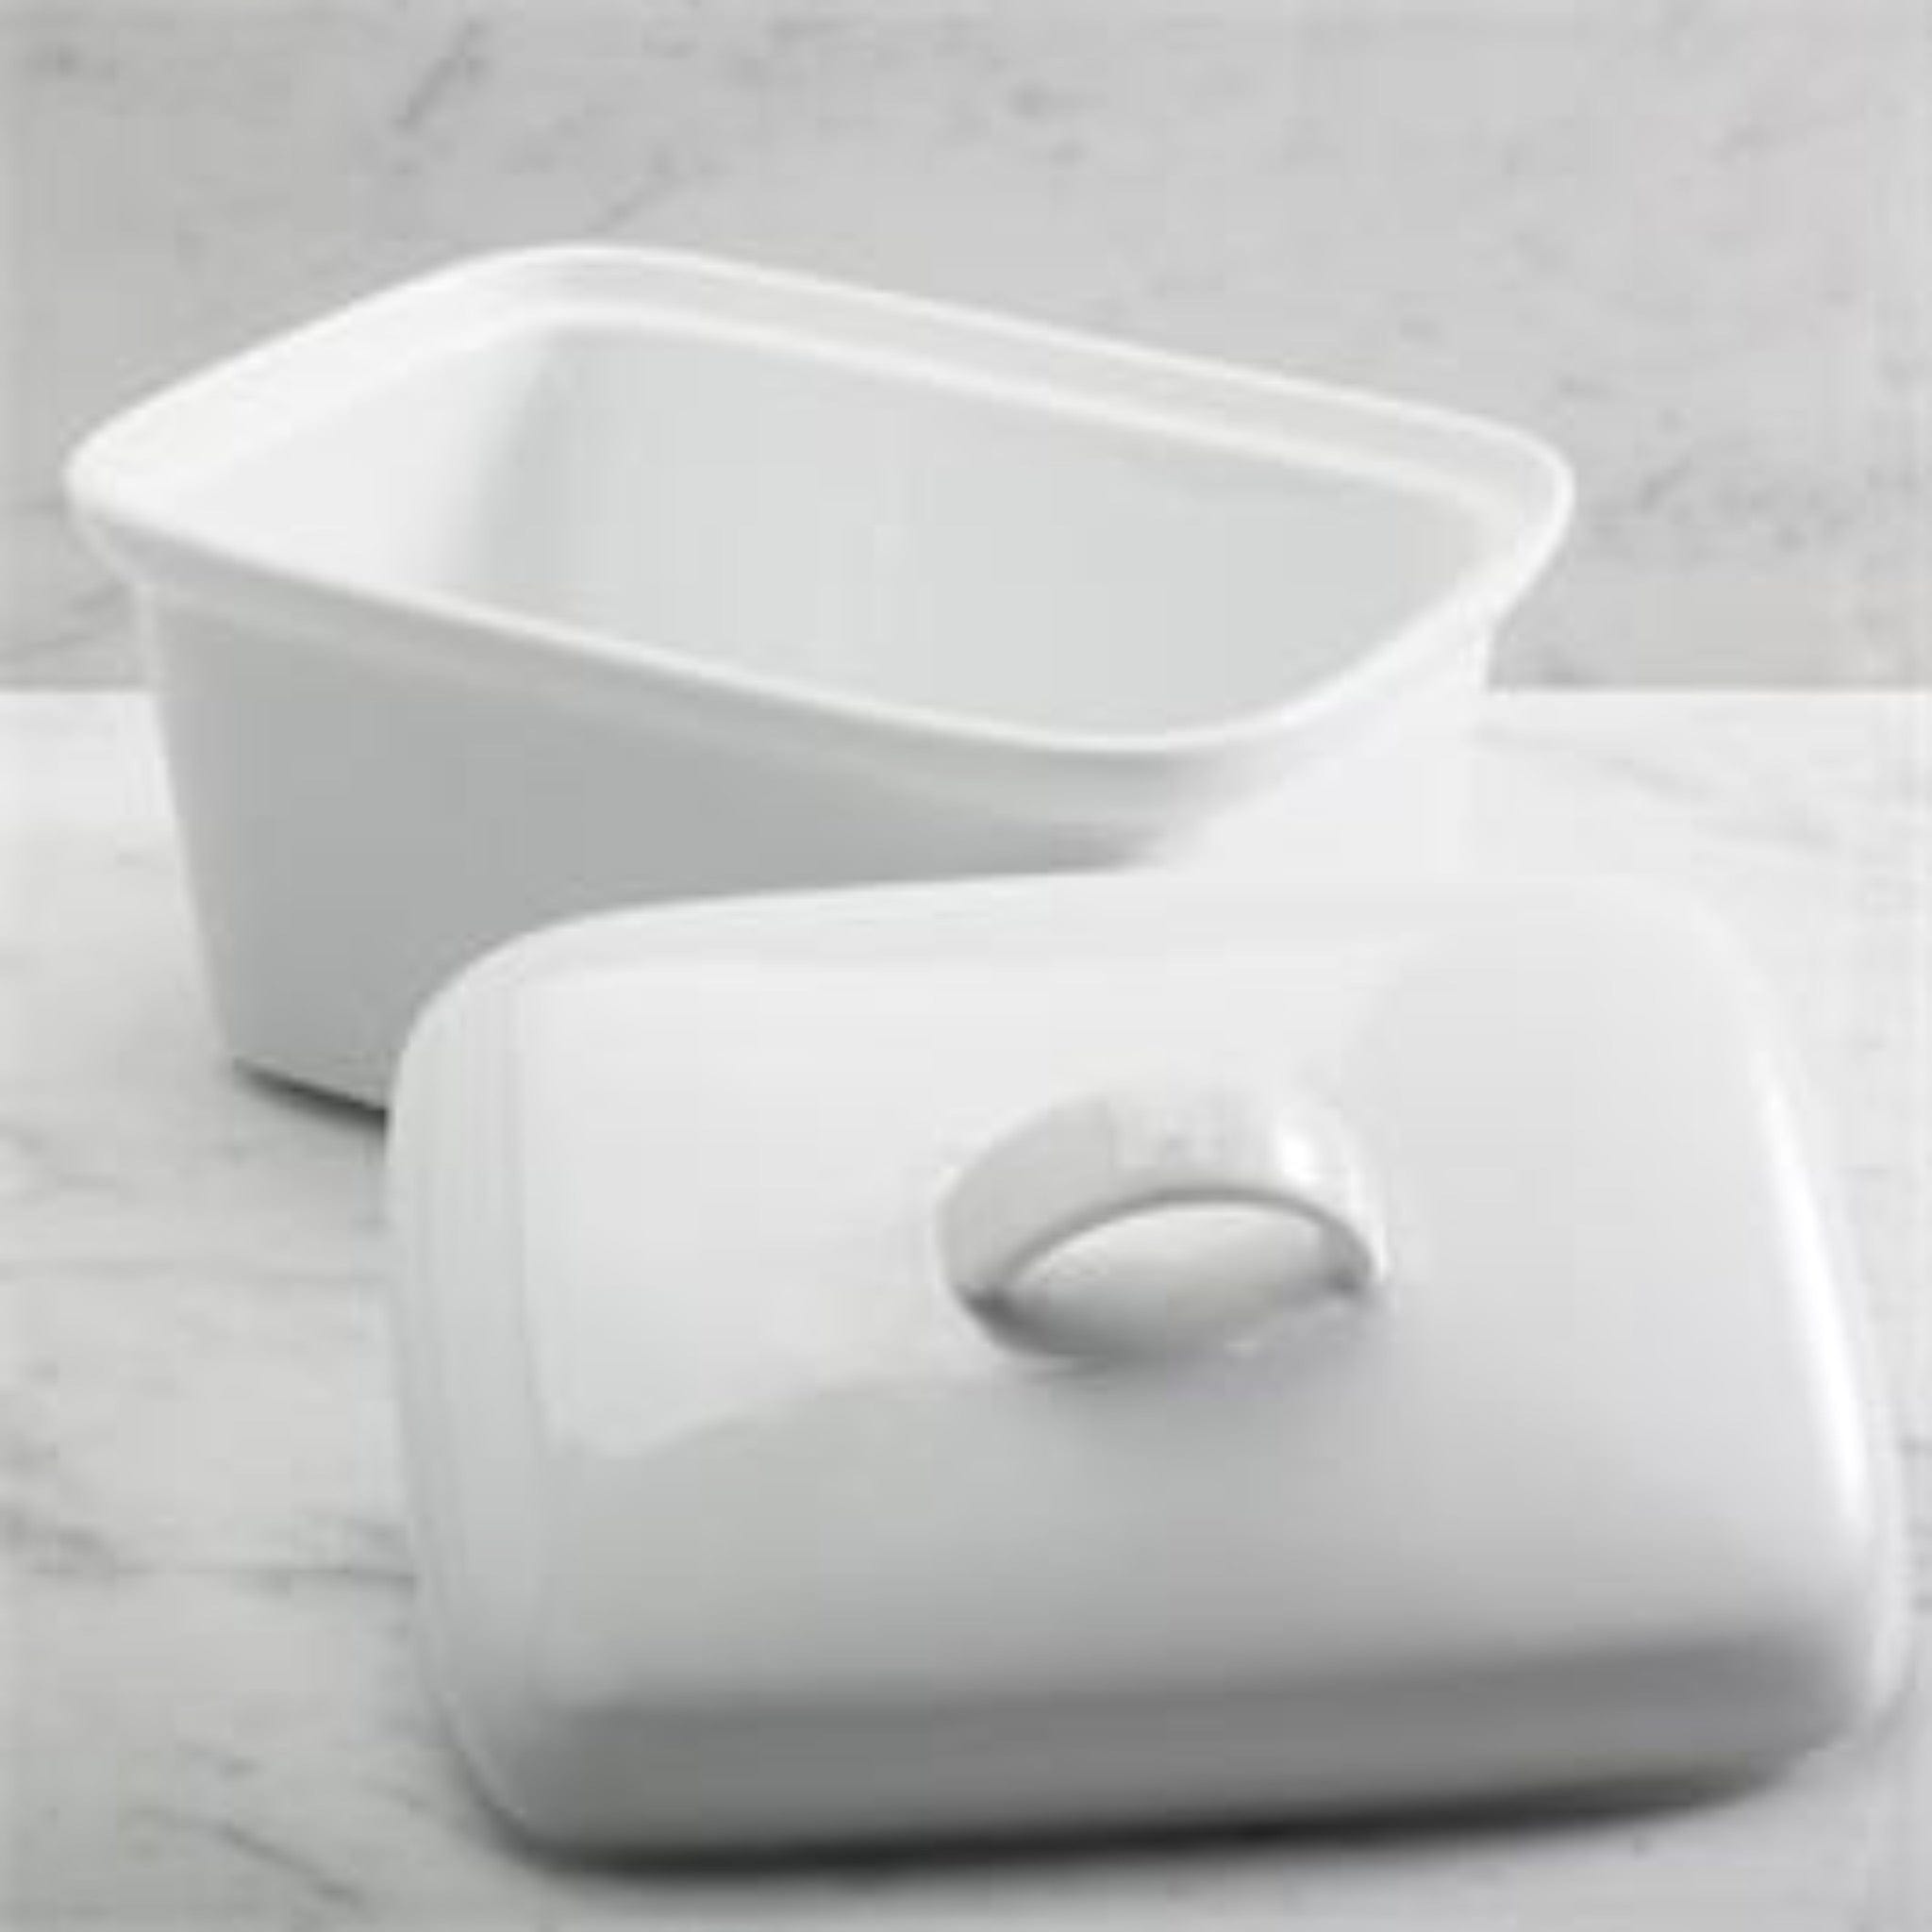 BIA Covered Butter Dish - out of stock - accepting pre-orders